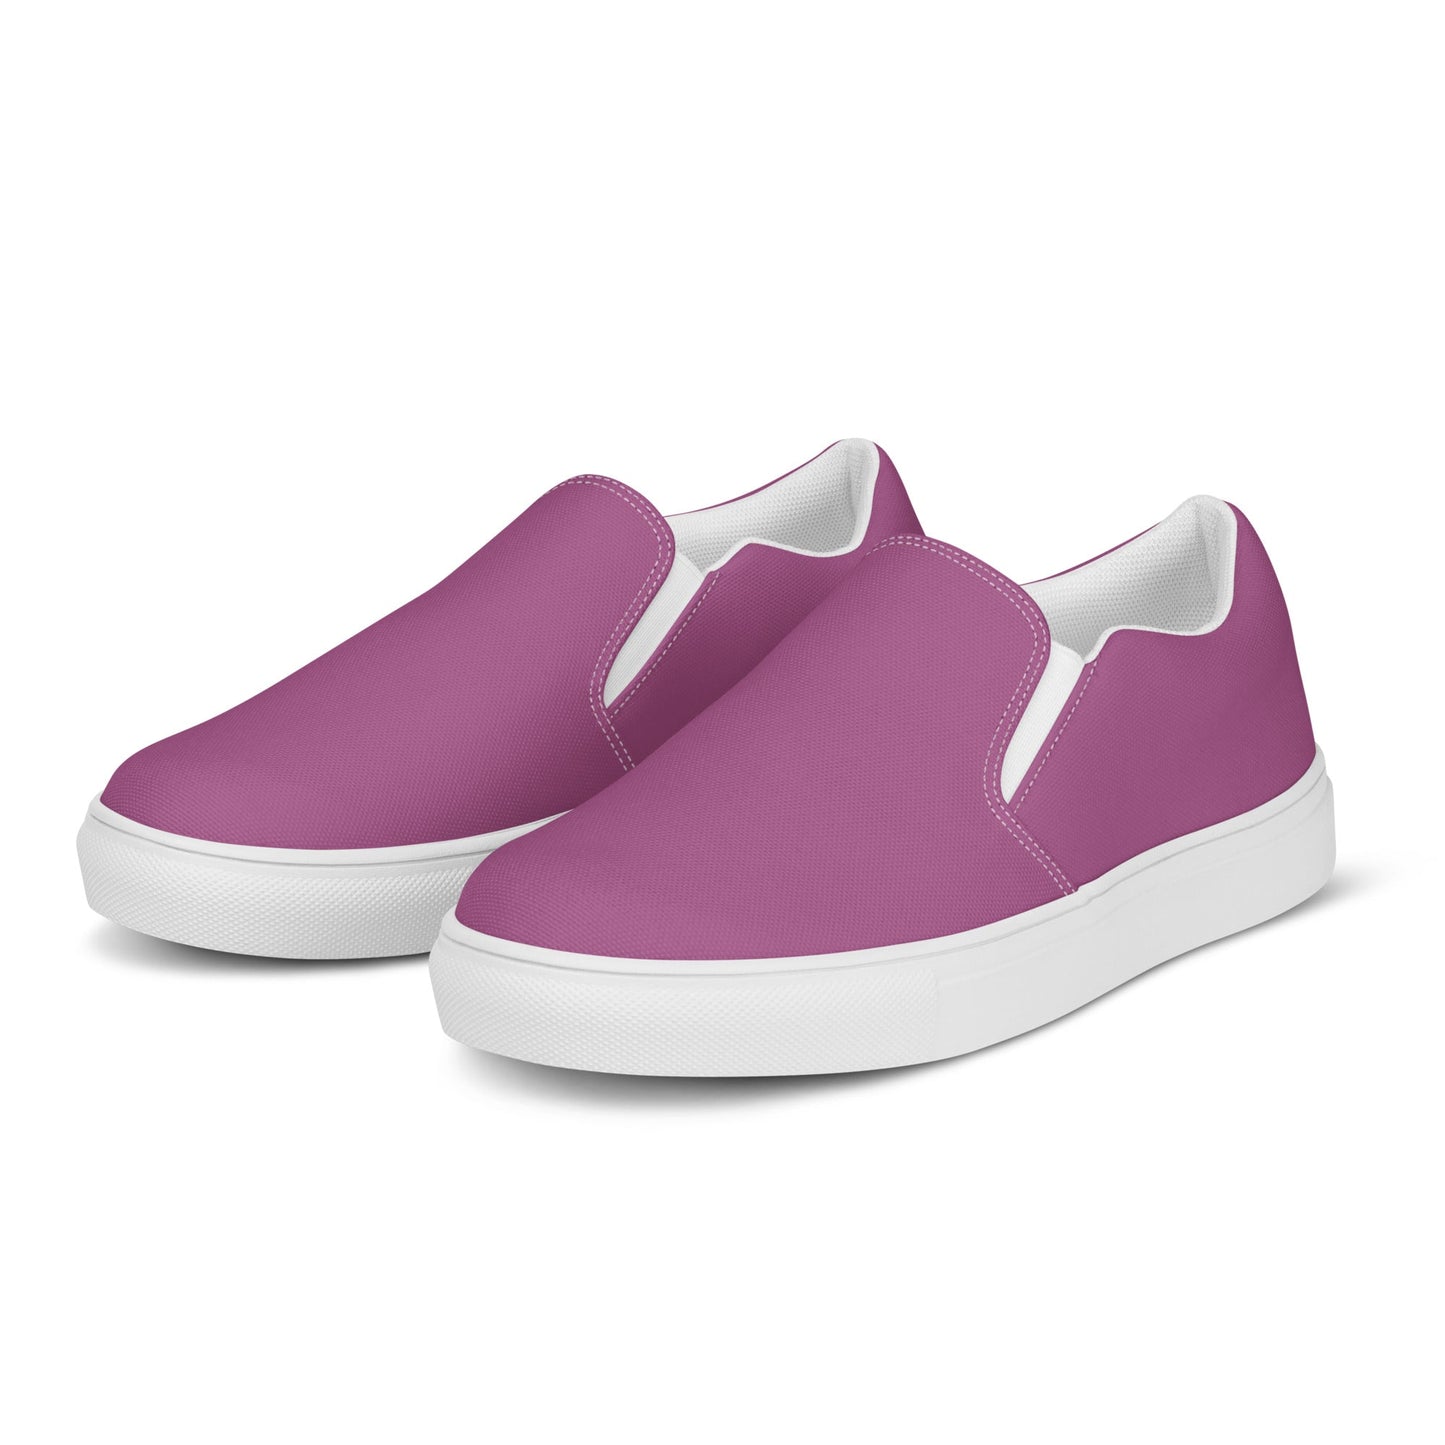 klasneakers Women’s slip-on canvas shoes - Candy Wrapper Pink